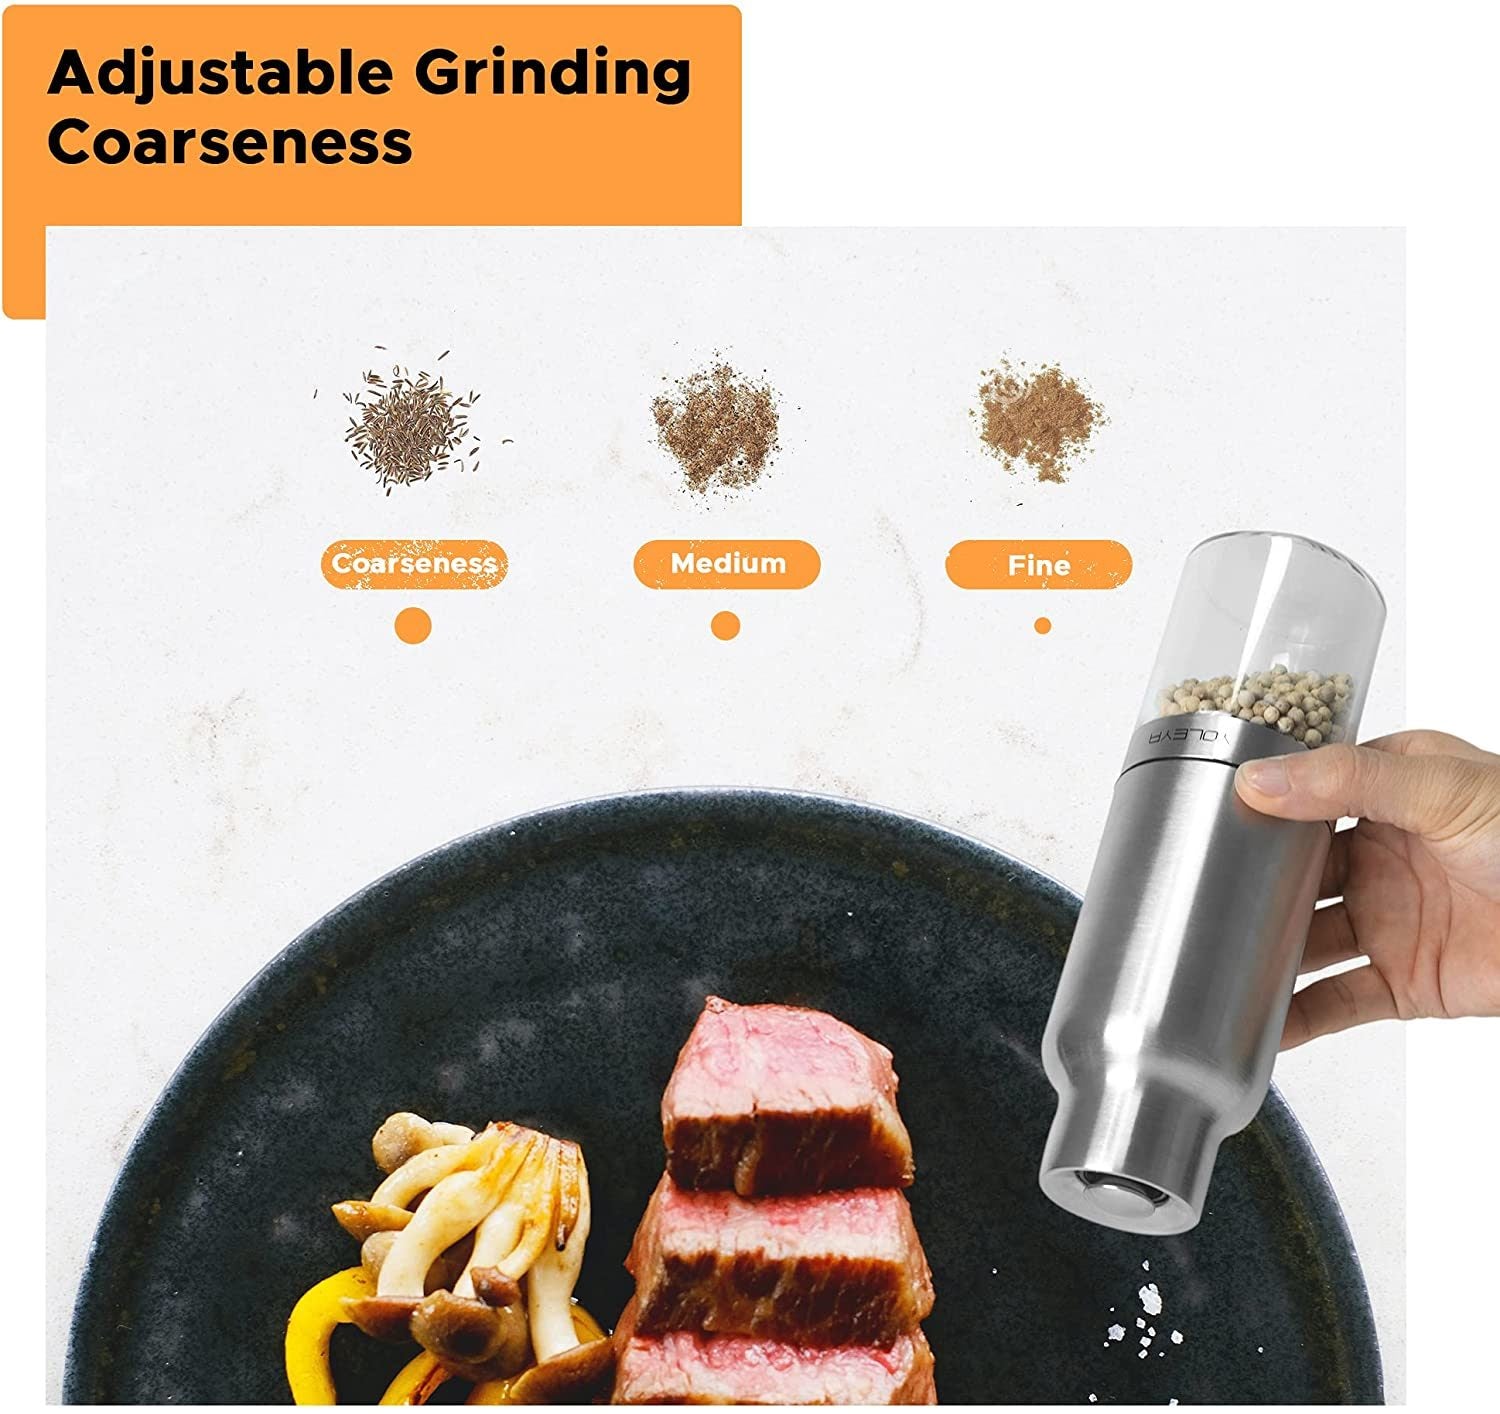 Gravity Electric Salt and Pepper Grinder Set - Automatic Pepper or Salt Mill Shaker, Spice Grinder Battery-Operated with Adjustable Coarseness,One Hand Operated,Utility Brush,Premium Stainless Steel.